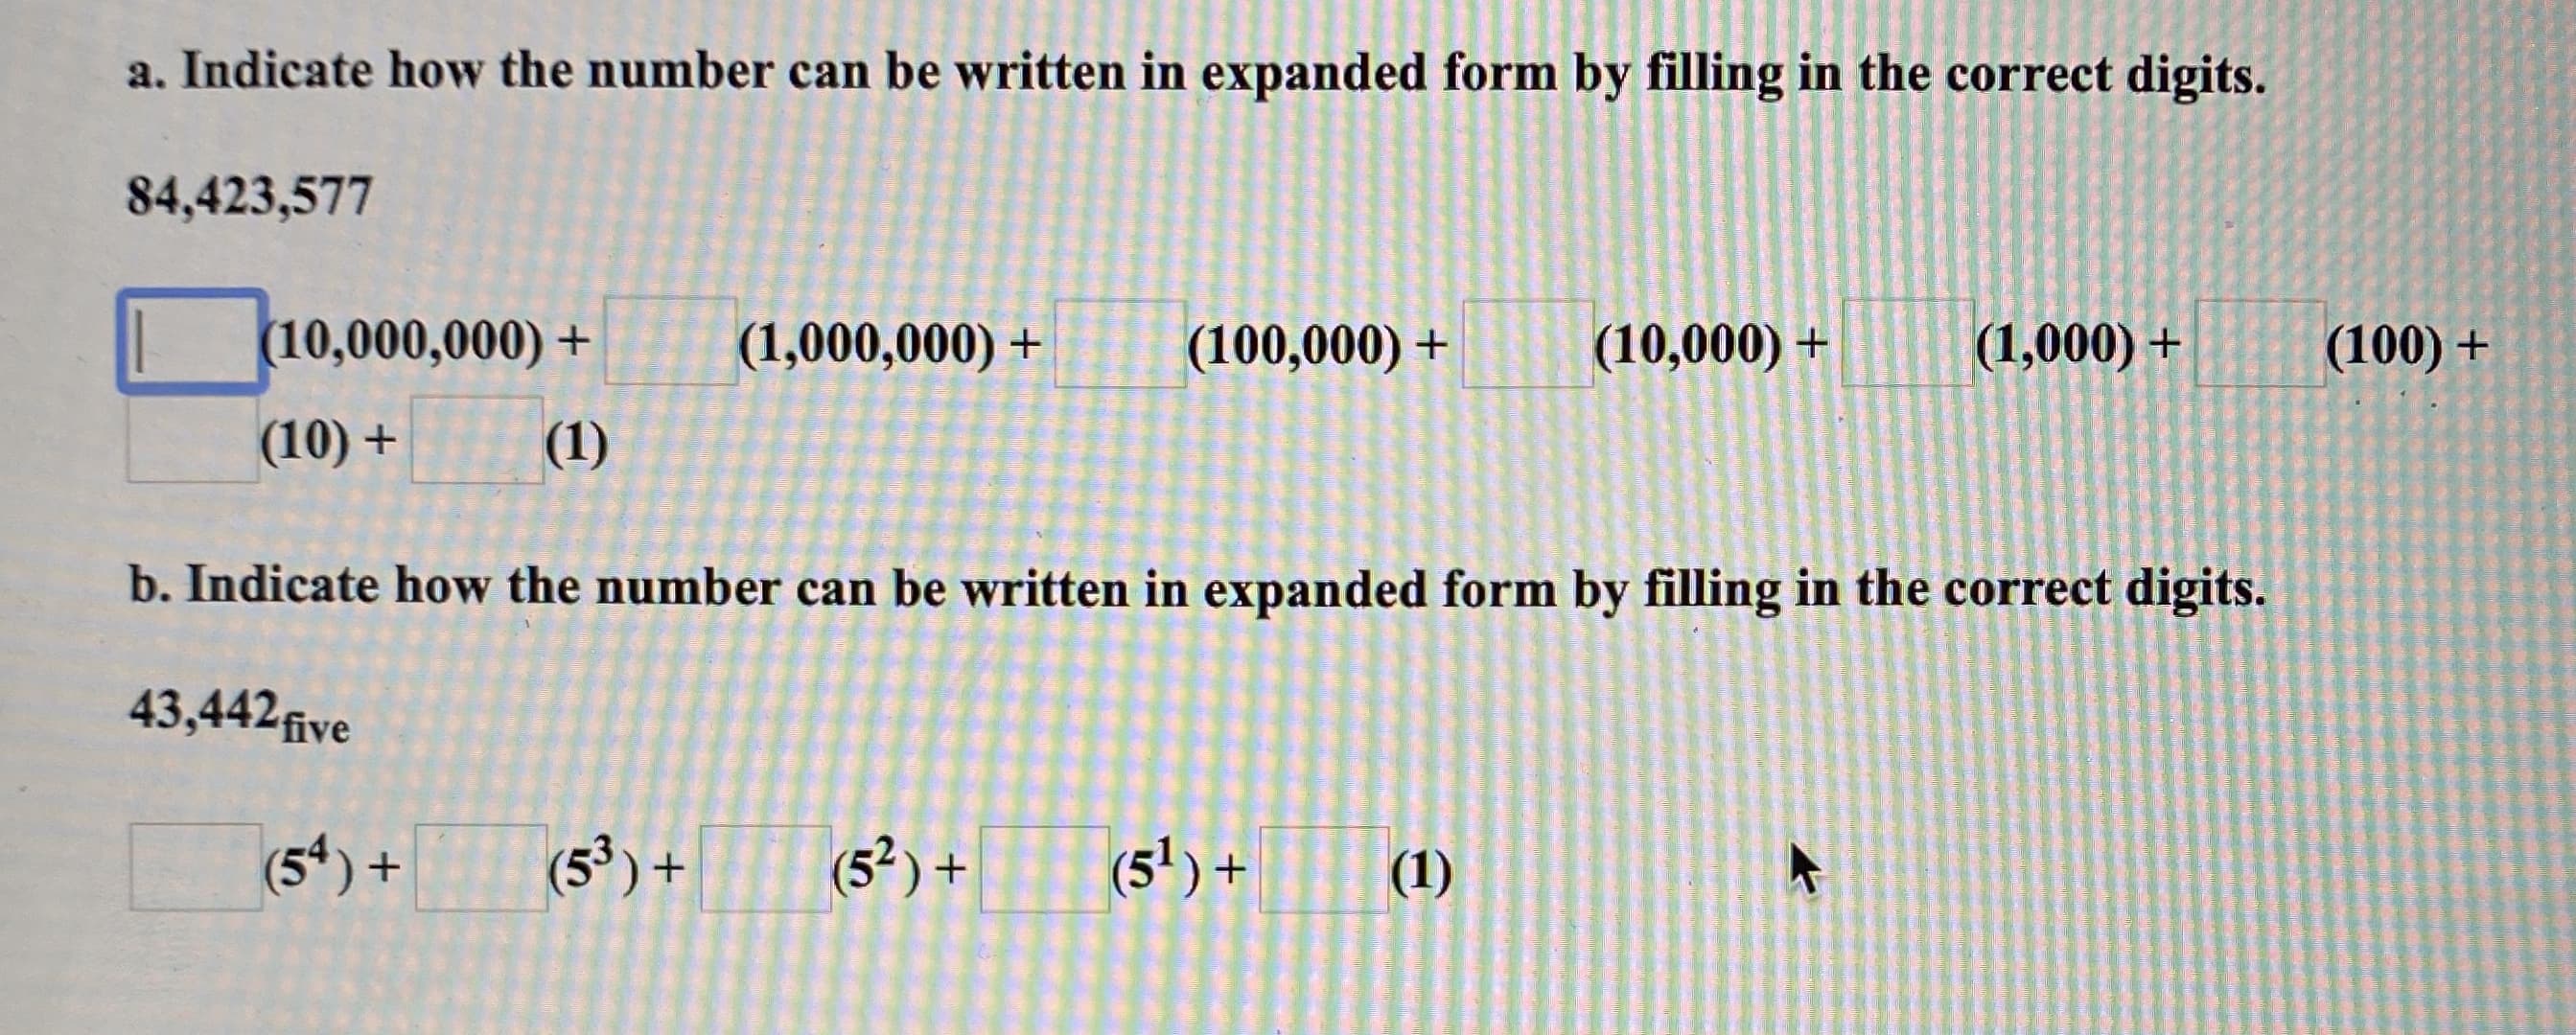 a. Indicate how the number can be written in expanded form by filling in the correct digits.
84,423,577
(10,000,000) +
(1,000,000) +
(100,000) +
(10,000) +
(1,000) +
(100) +
(10) +
(1)
b. Indicate how the number can be written in expanded form by filling in the correct digits.
43,442five
(5) +
(5³)+
(5² ) +
(5') +
(1)
